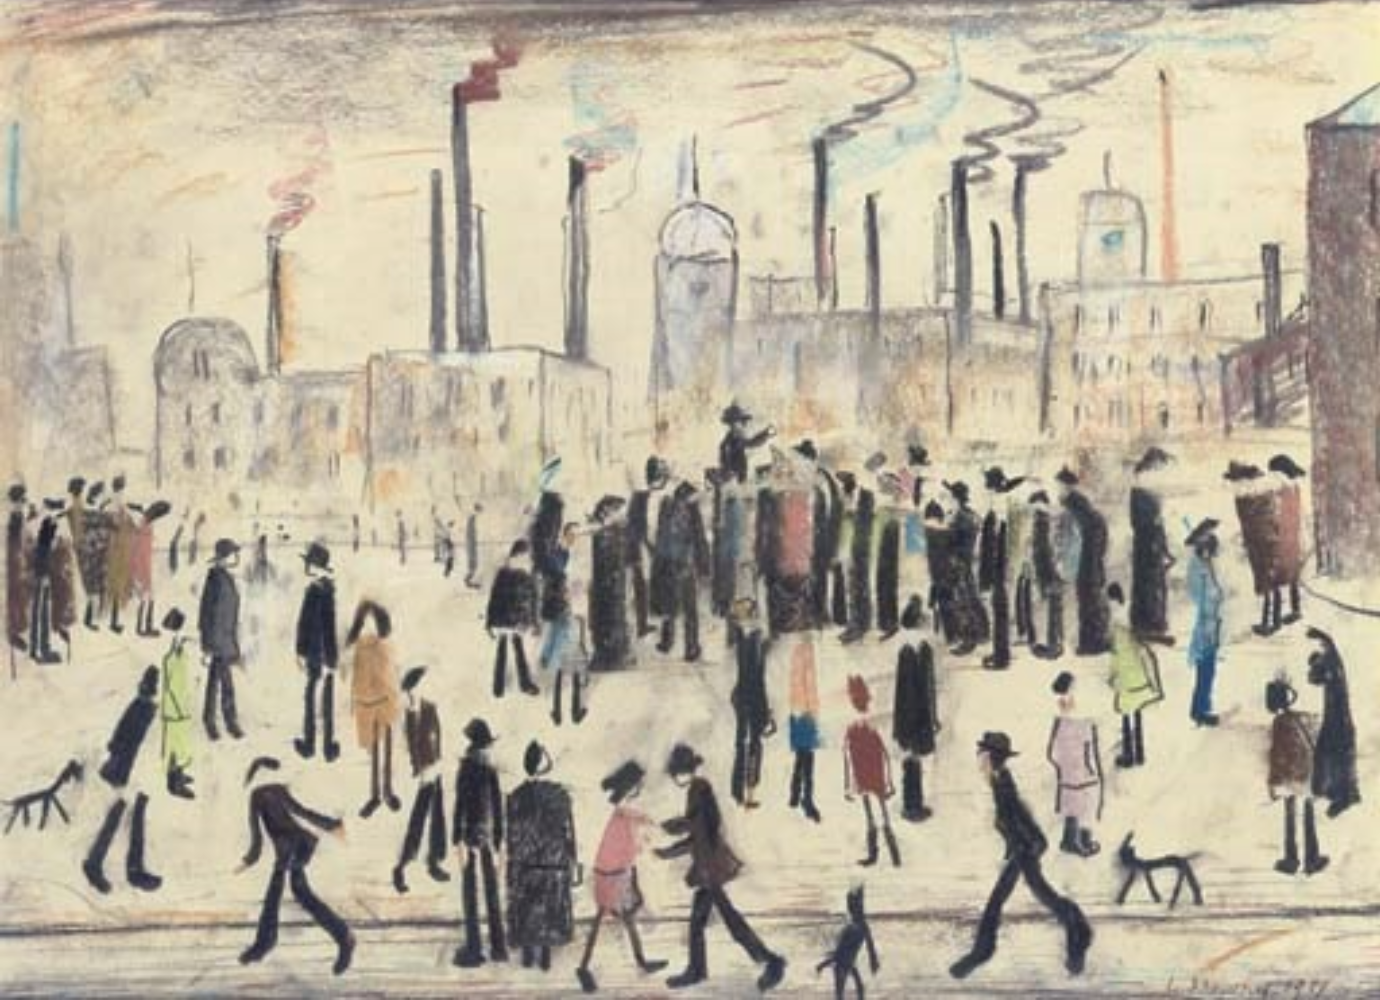 Open air meeting (1951) by Laurence Stephen Lowry (1887 - 1976), English artist.